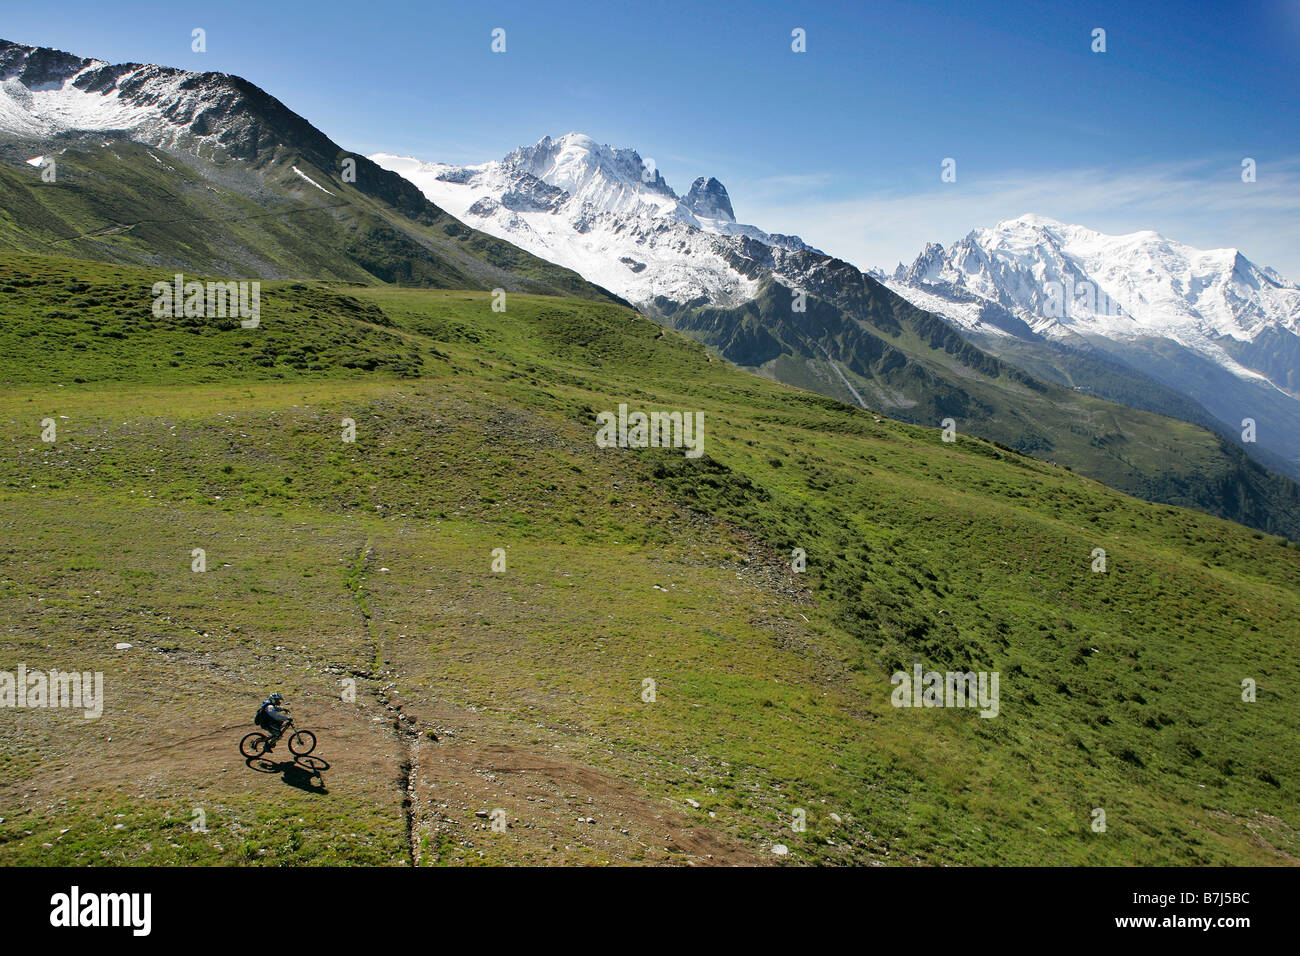 Mountain bike in front of The Mont Blanc, Les Drus and La Verte(left) Stock Photo